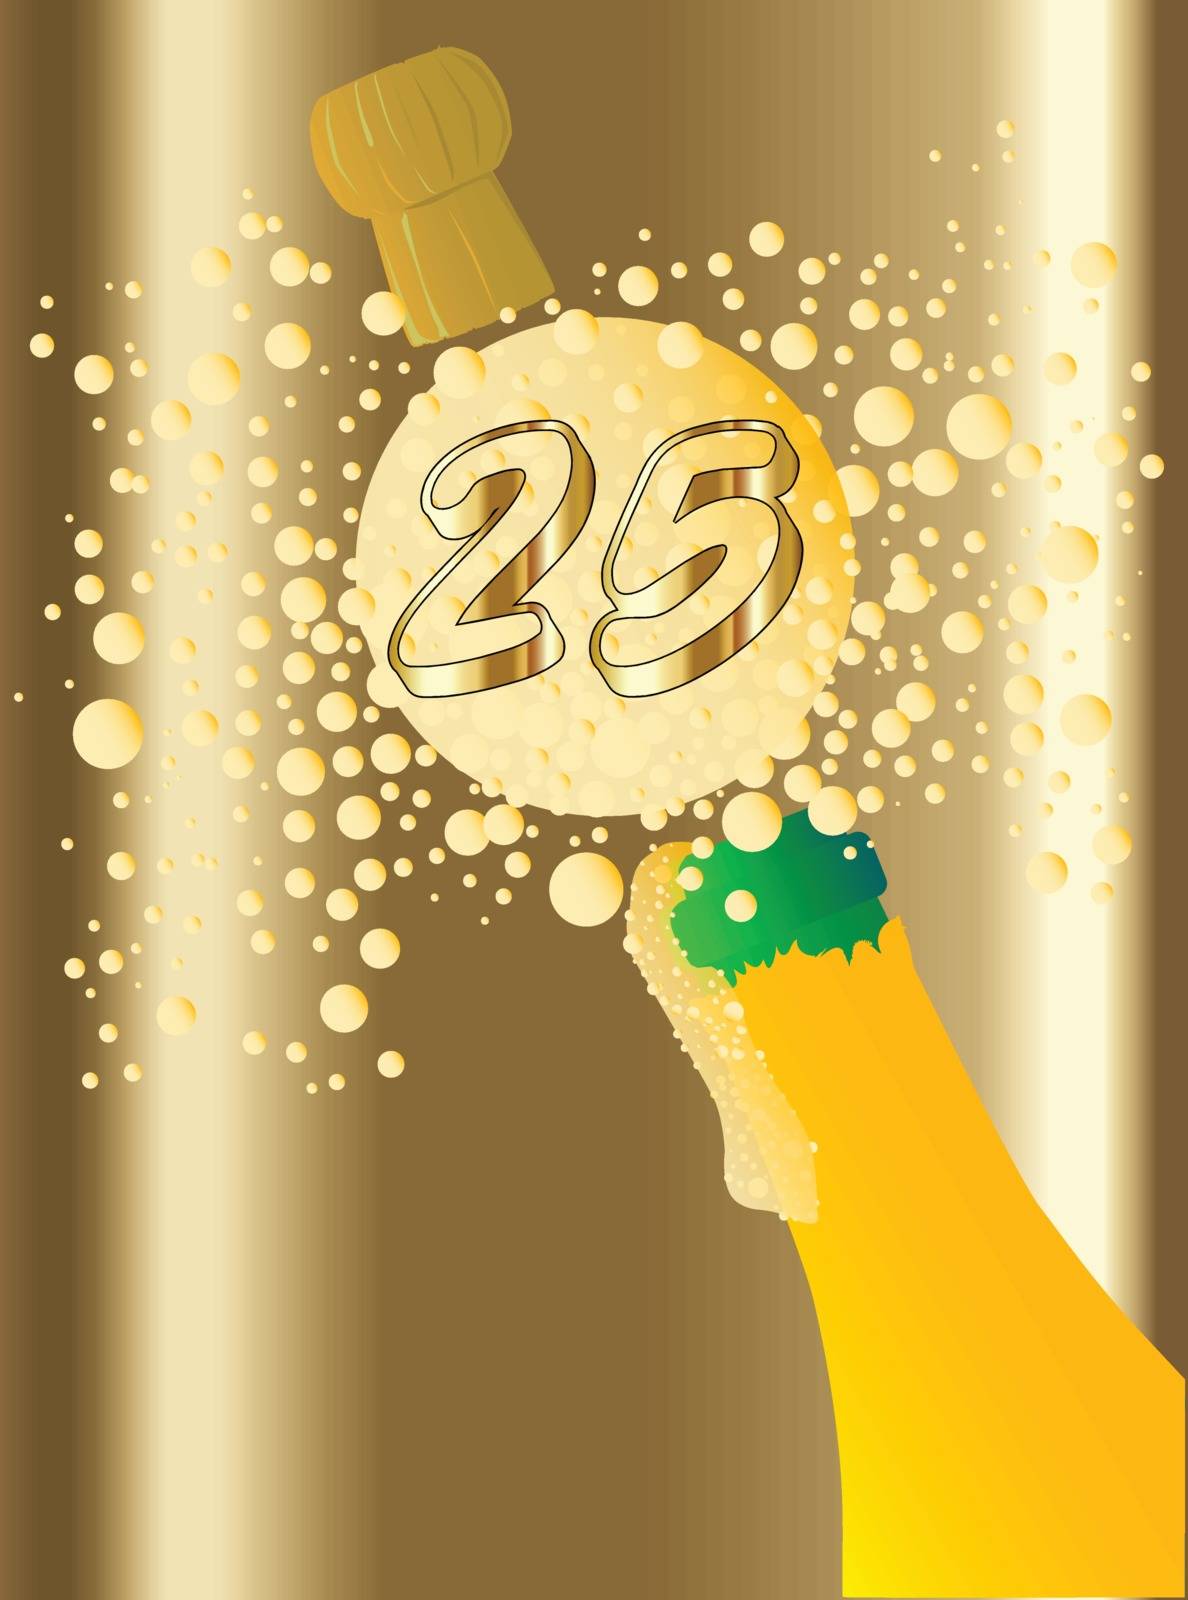 Champagne bottle being opened with froth and bubbles with a large bubble exclaiming 10